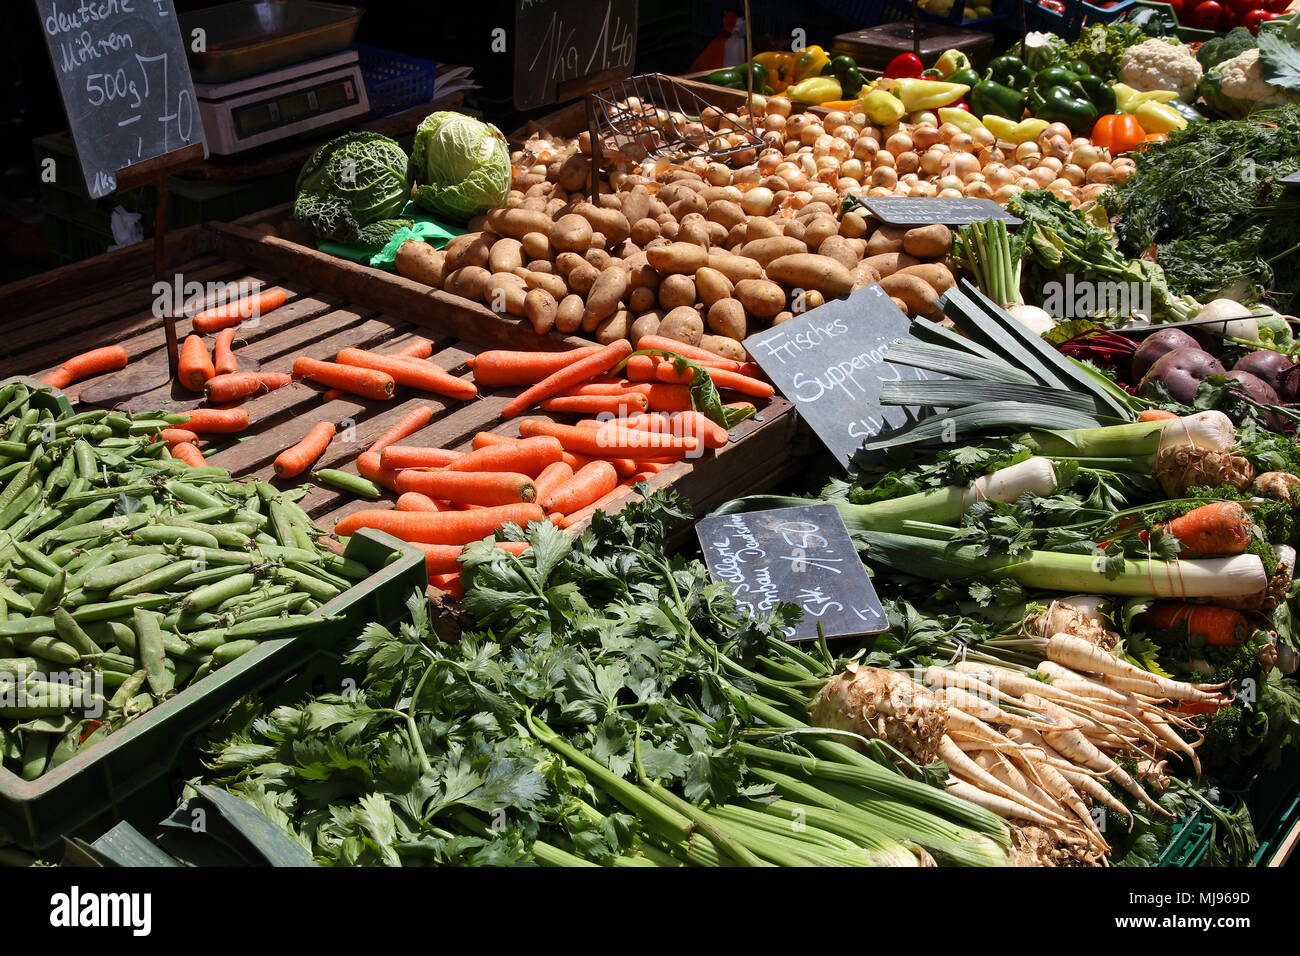 Vegetable stand at a marketplace in Mainz, Germany. Farmers market. Stock Photo